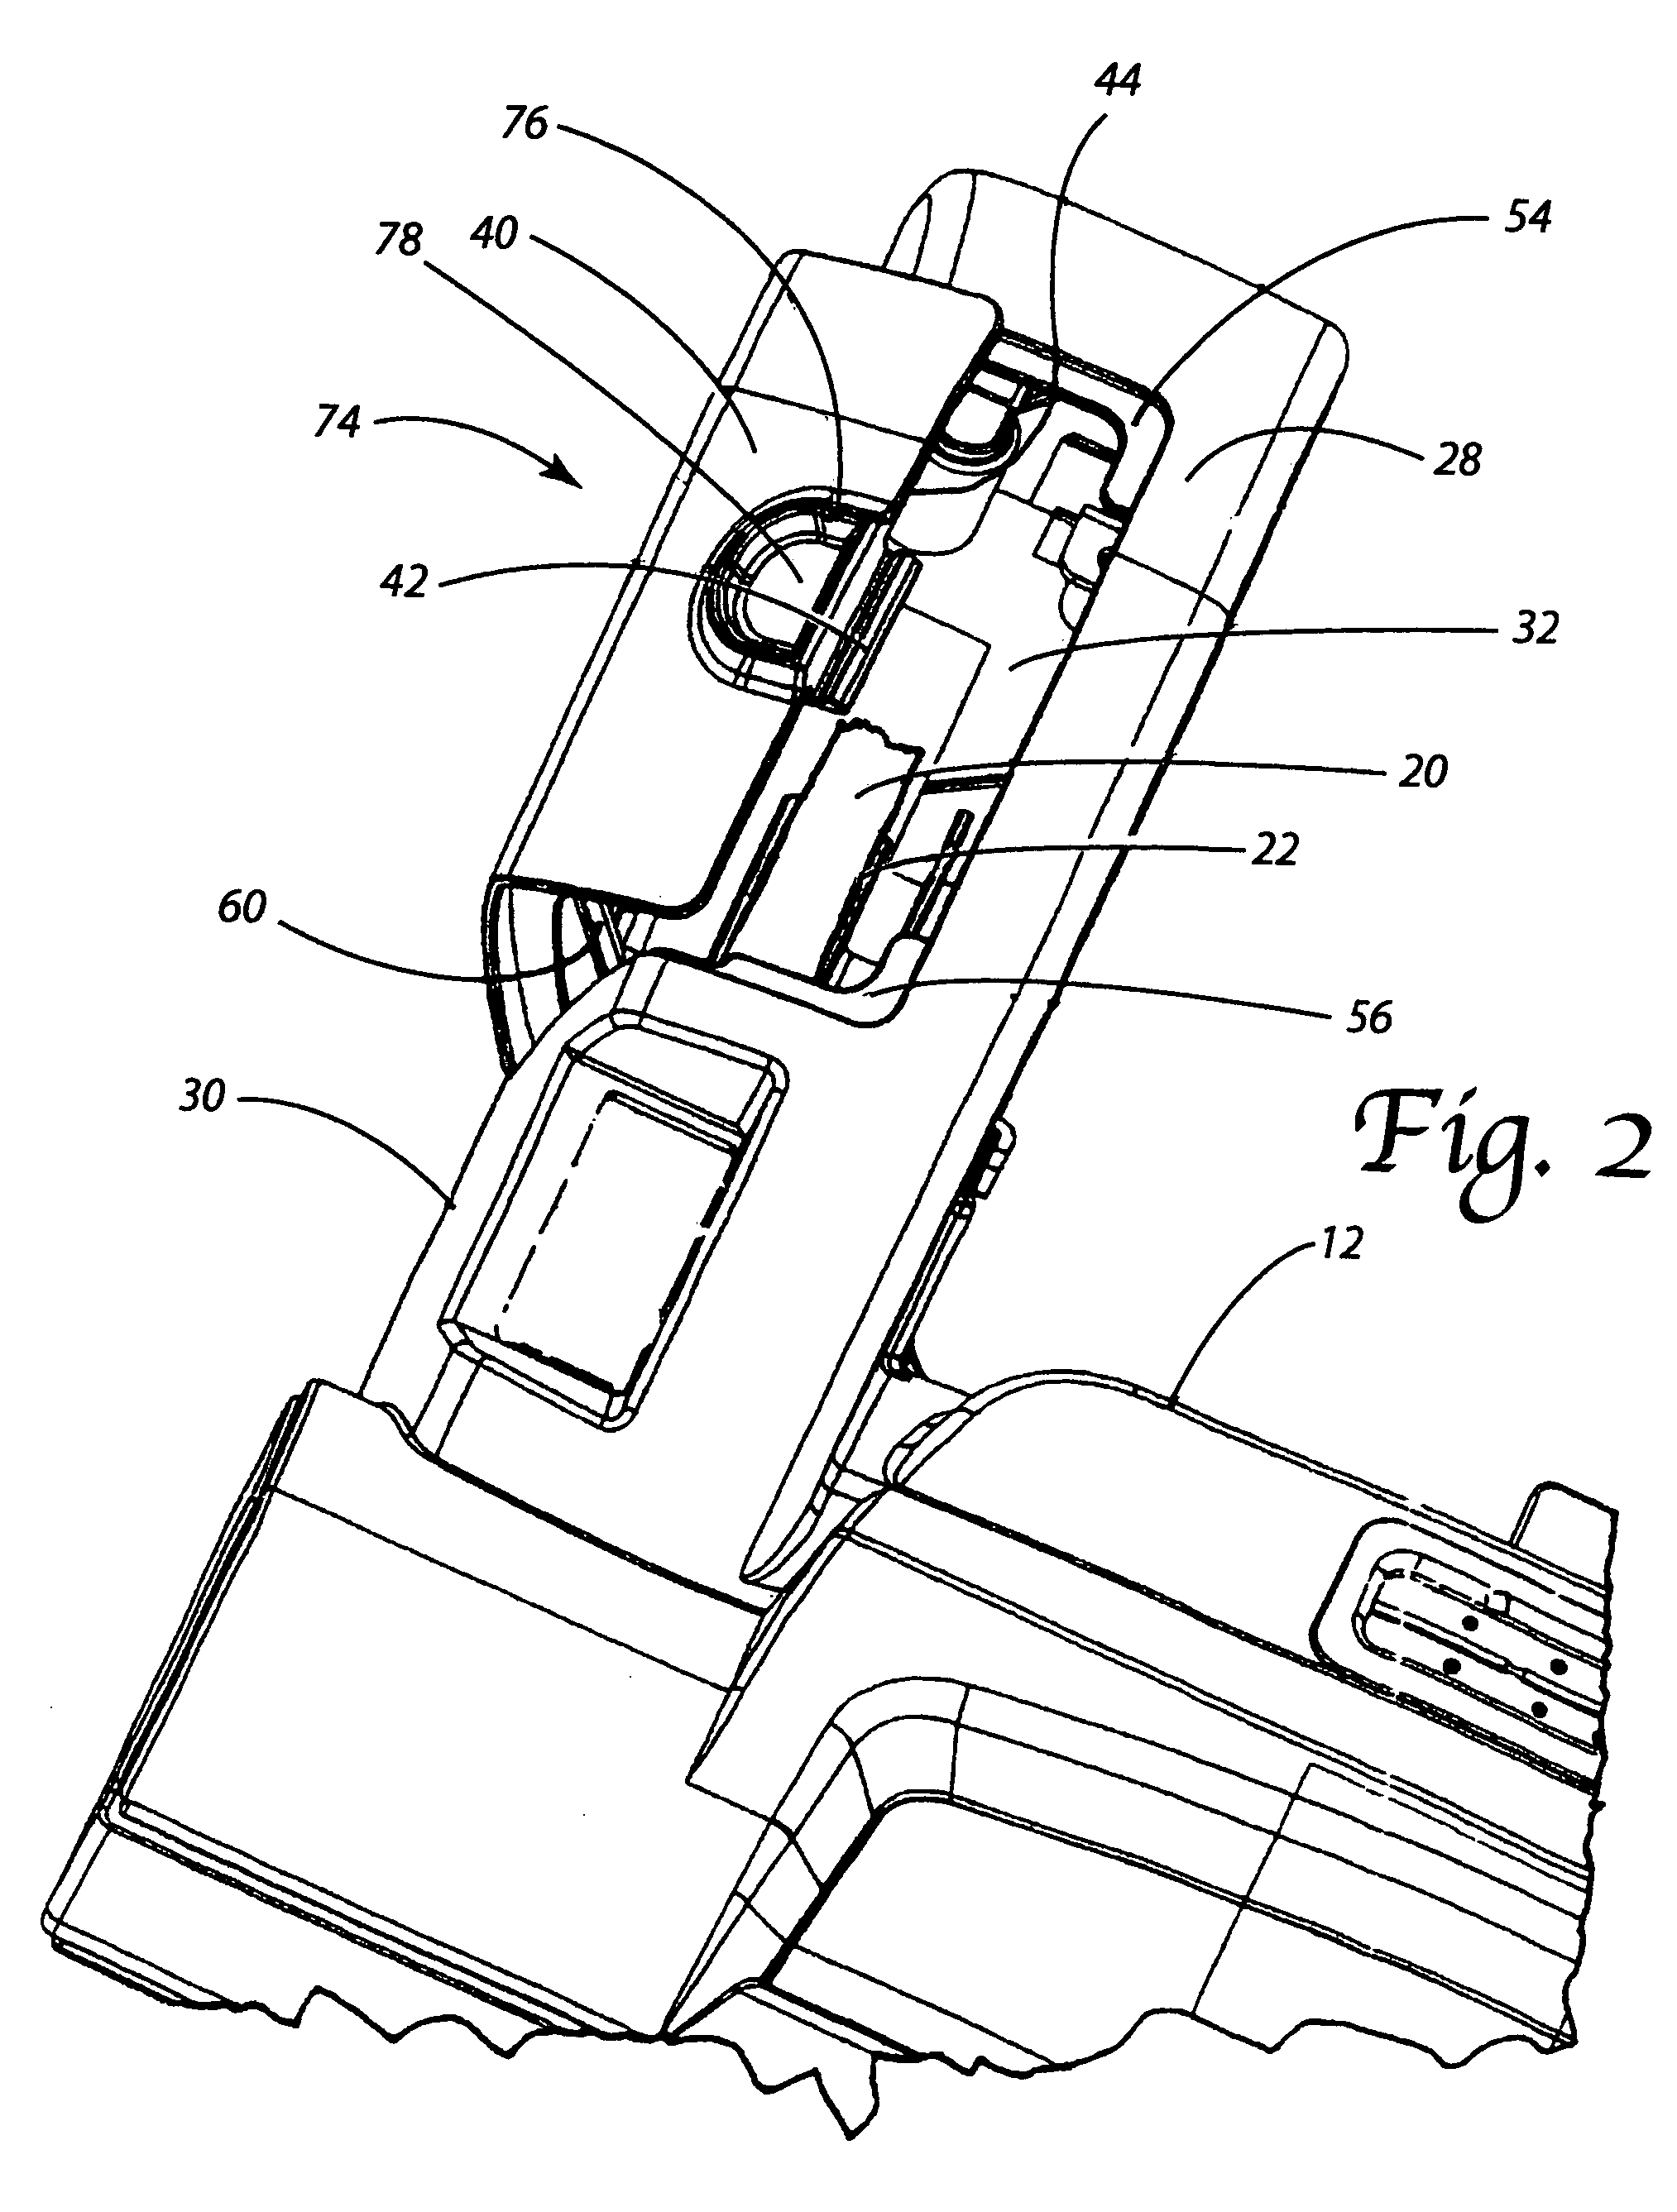 Nozzle assembly housing for vacuum cleaner